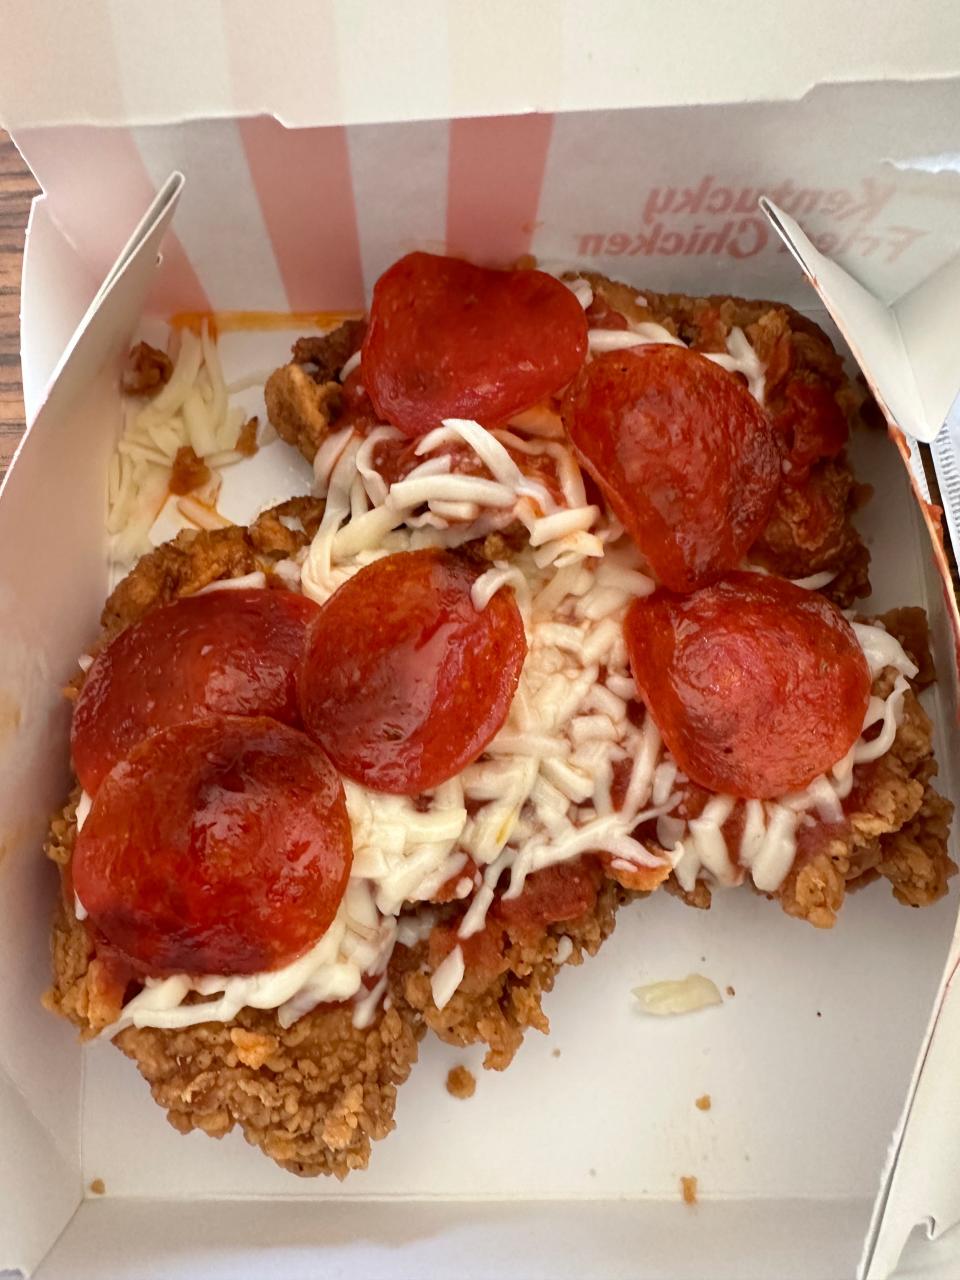 Kentucky Fried Chicken launched Chizza on Monday. The new menu item tries to combine pizza and fried chicken.